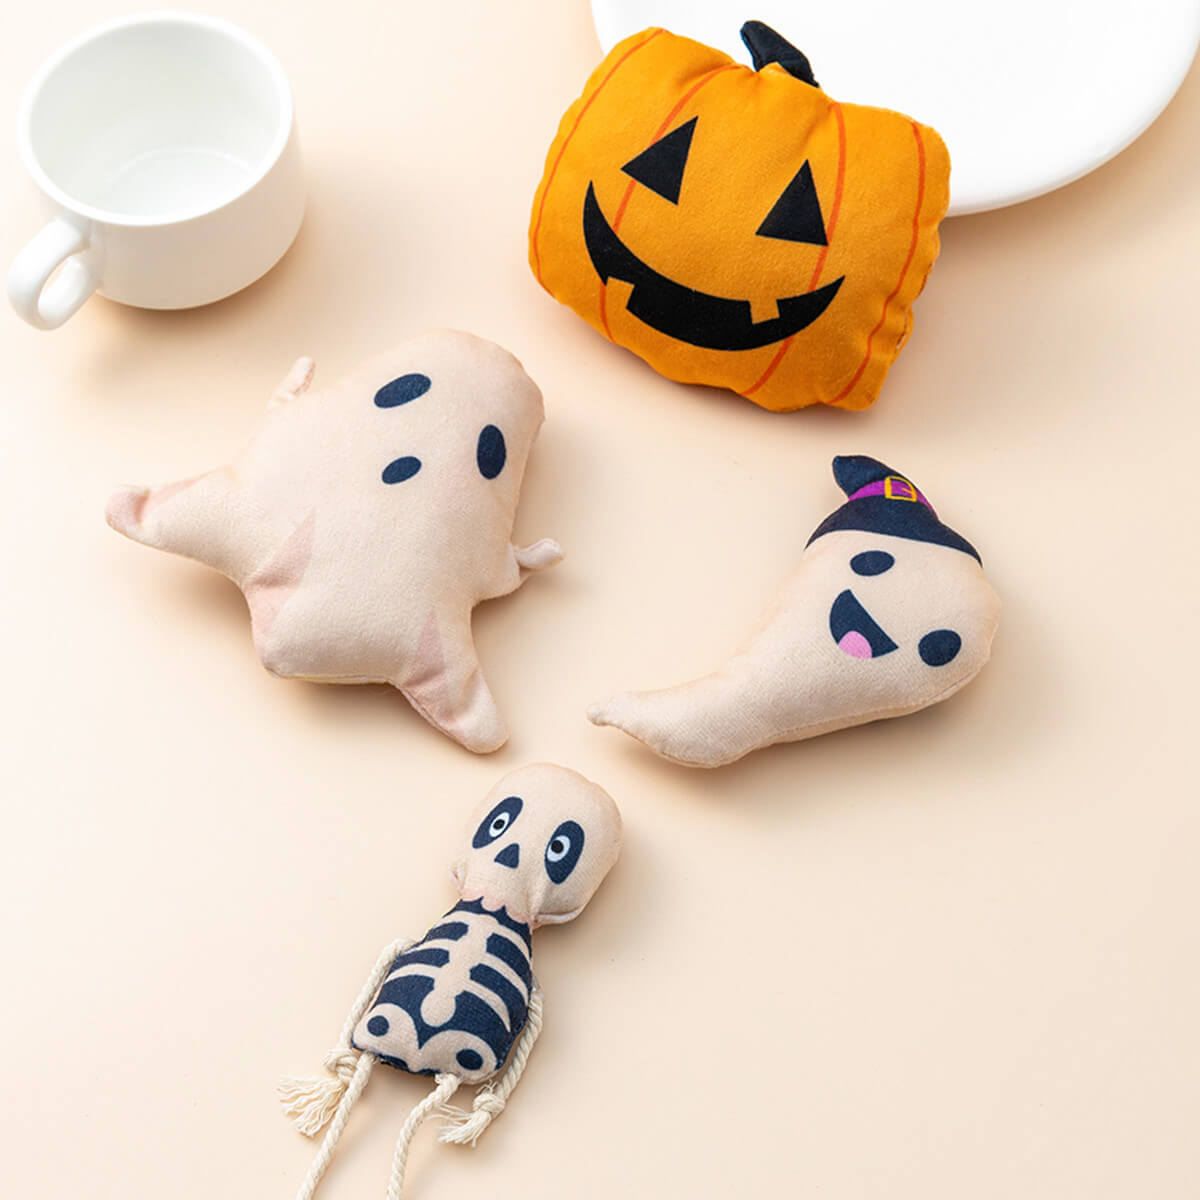 The Kitty Place™ Halloween Themed Catnip Toys Ghost Skeleton Pumpkin Pet Toy